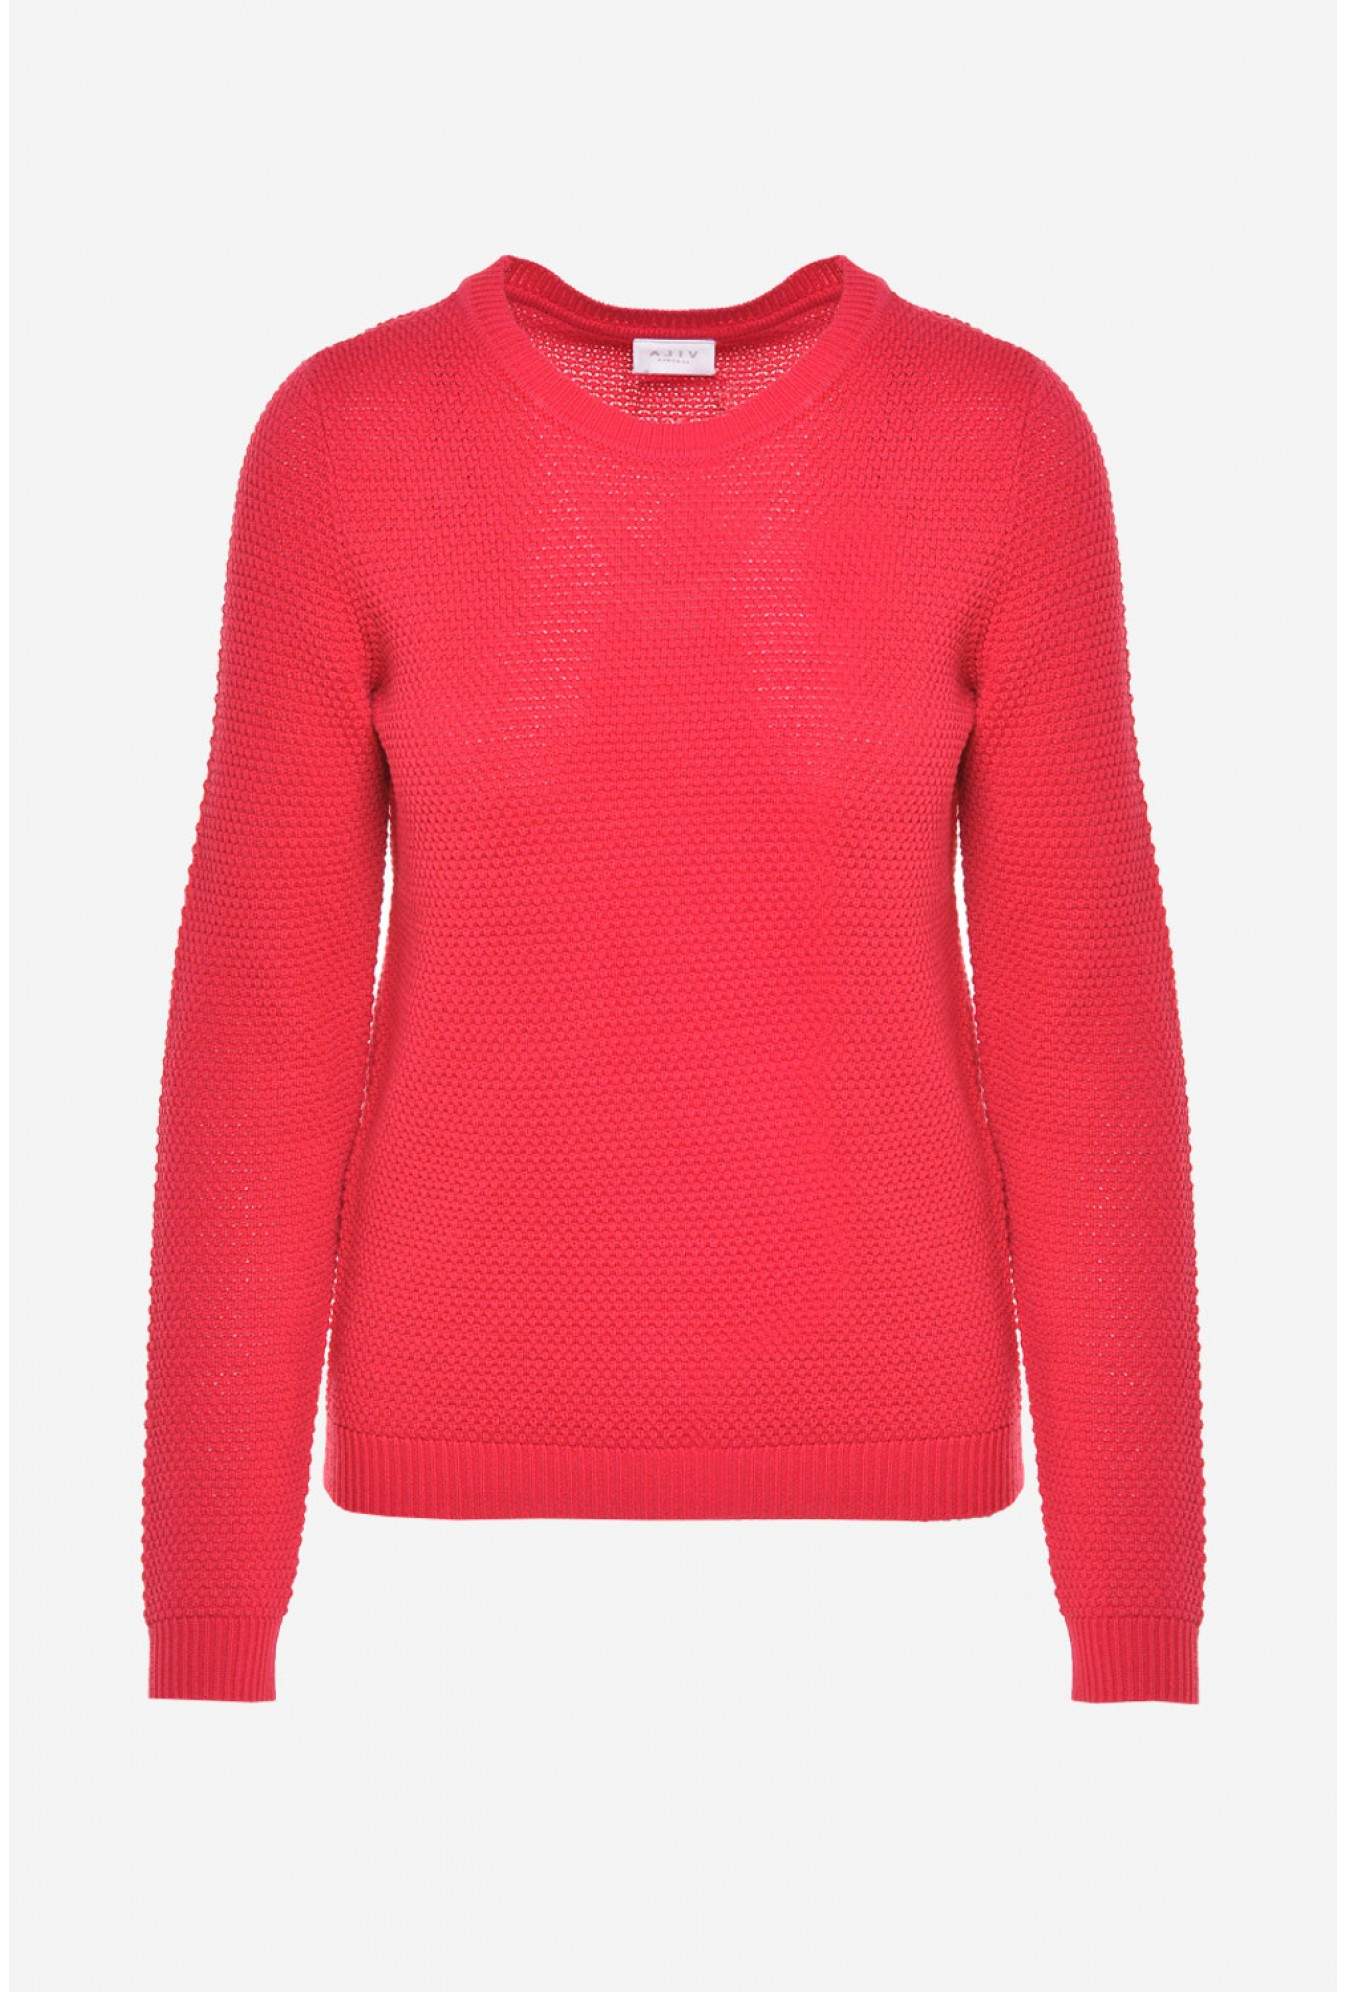 Vila Chassa Long Sleeve Knit Top in Red | iCLOTHING